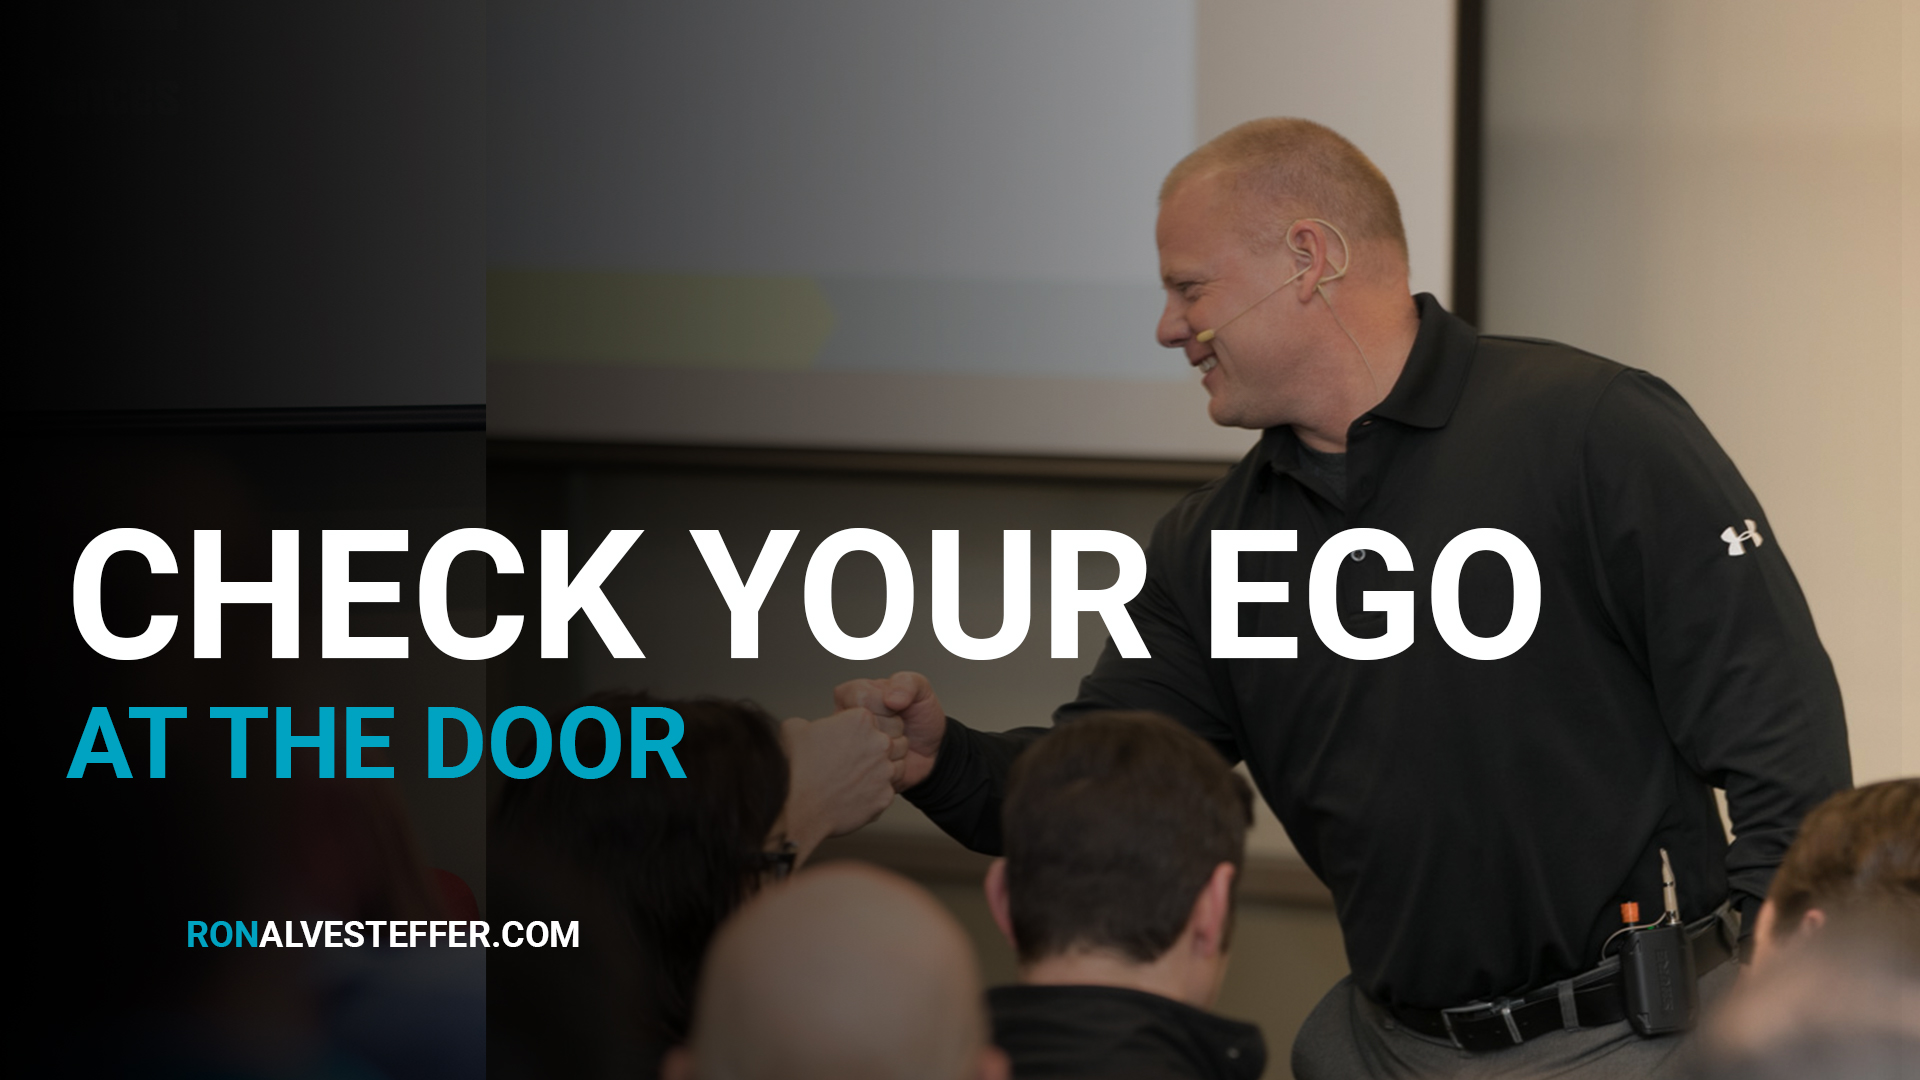 Check Your Ego at the Door